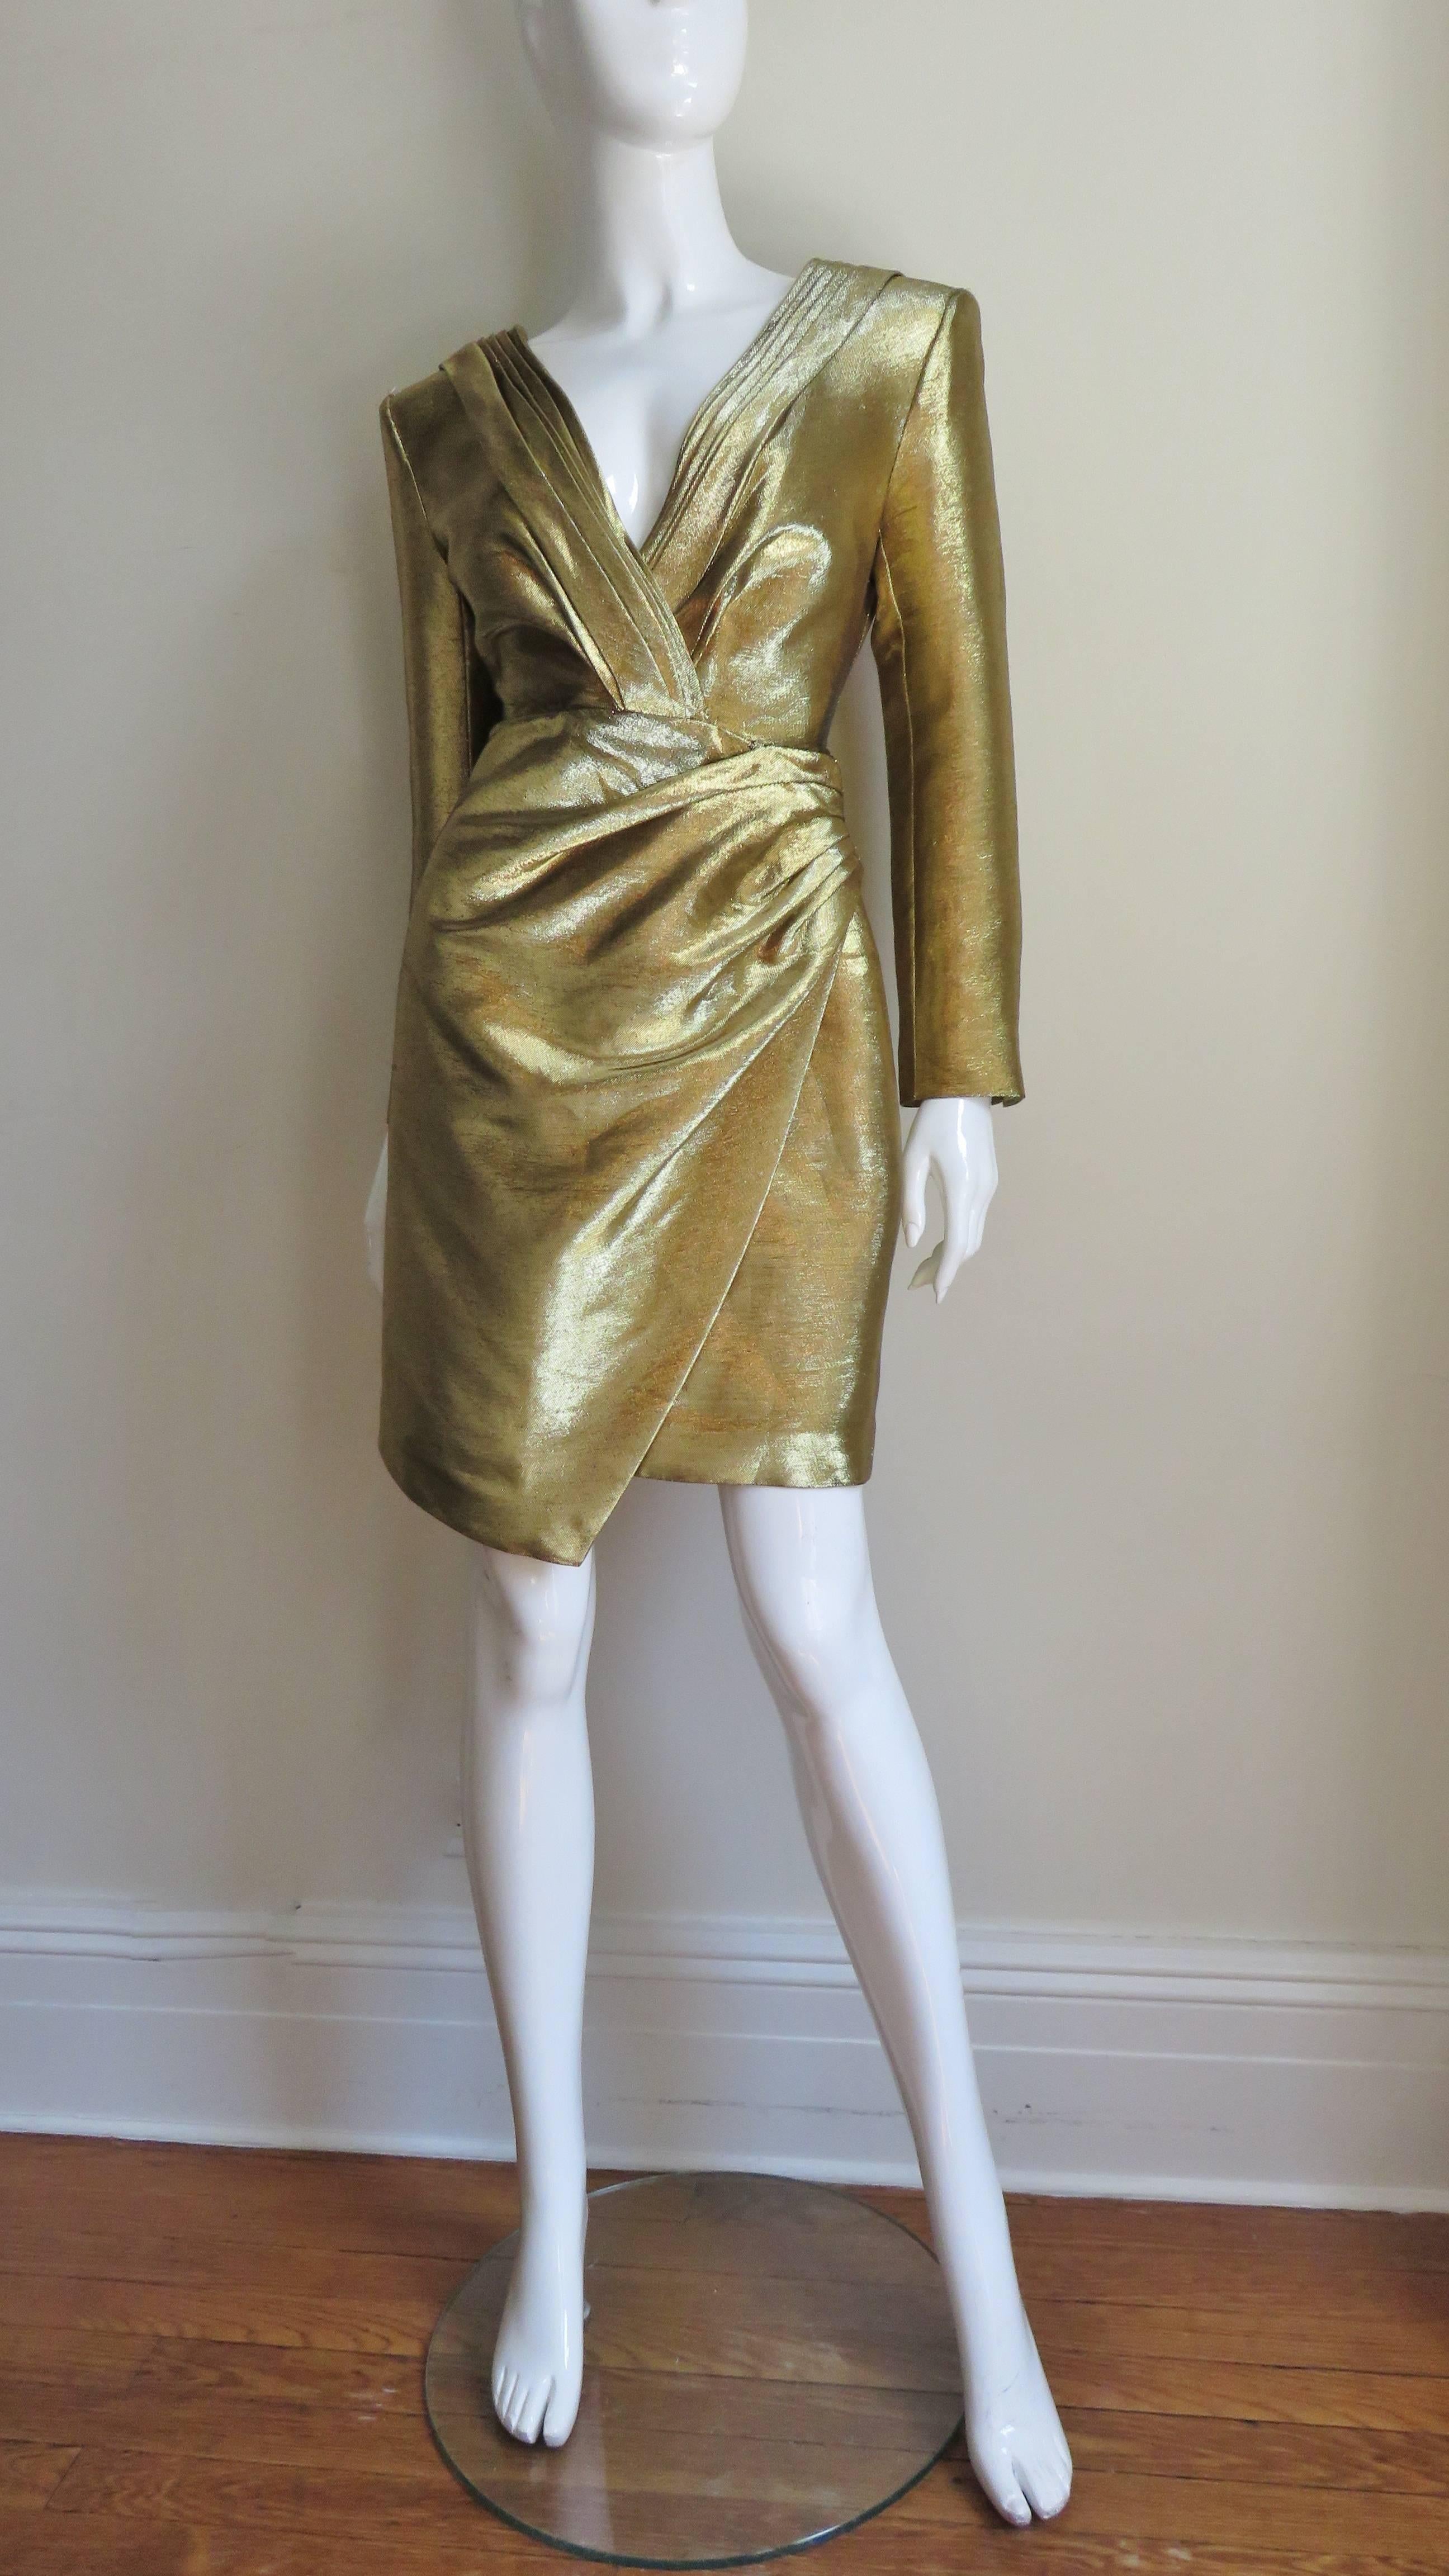 Saint Laurent Gold Wrap Dress S/S 2014 In Good Condition For Sale In Water Mill, NY